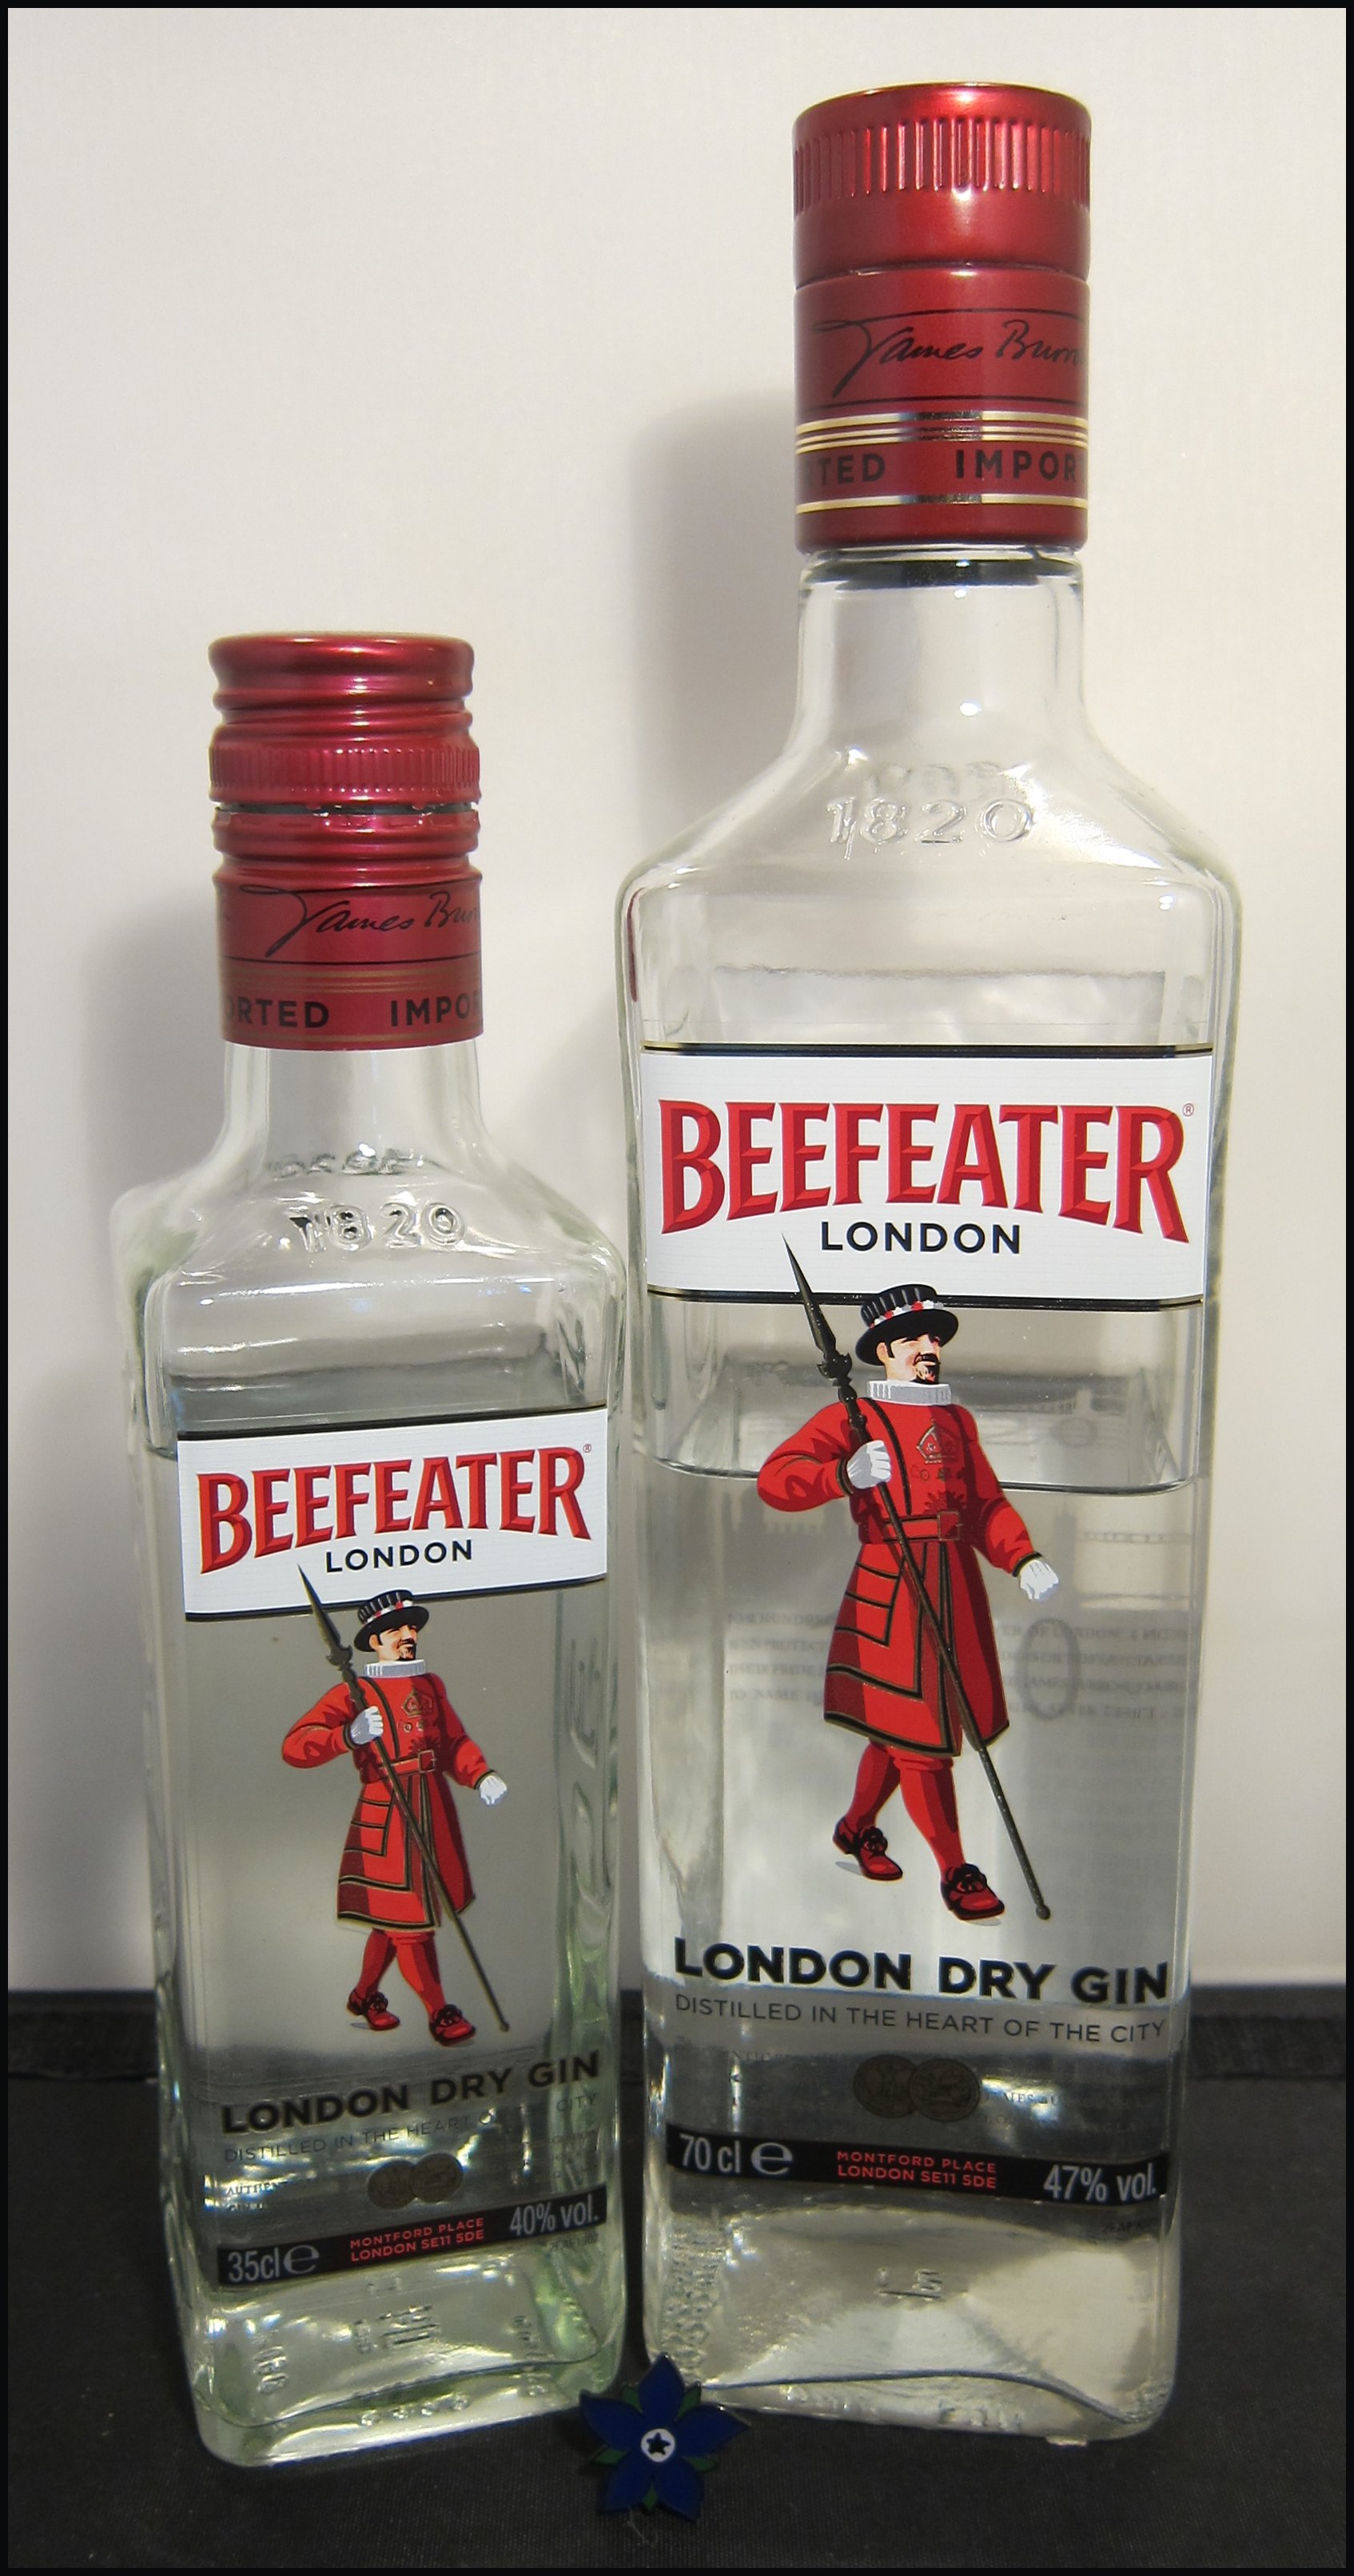 Cocktails with… Beefeater London Garden Gin – With Bonus Beefeater Gin! |  Summer Fruit Cup